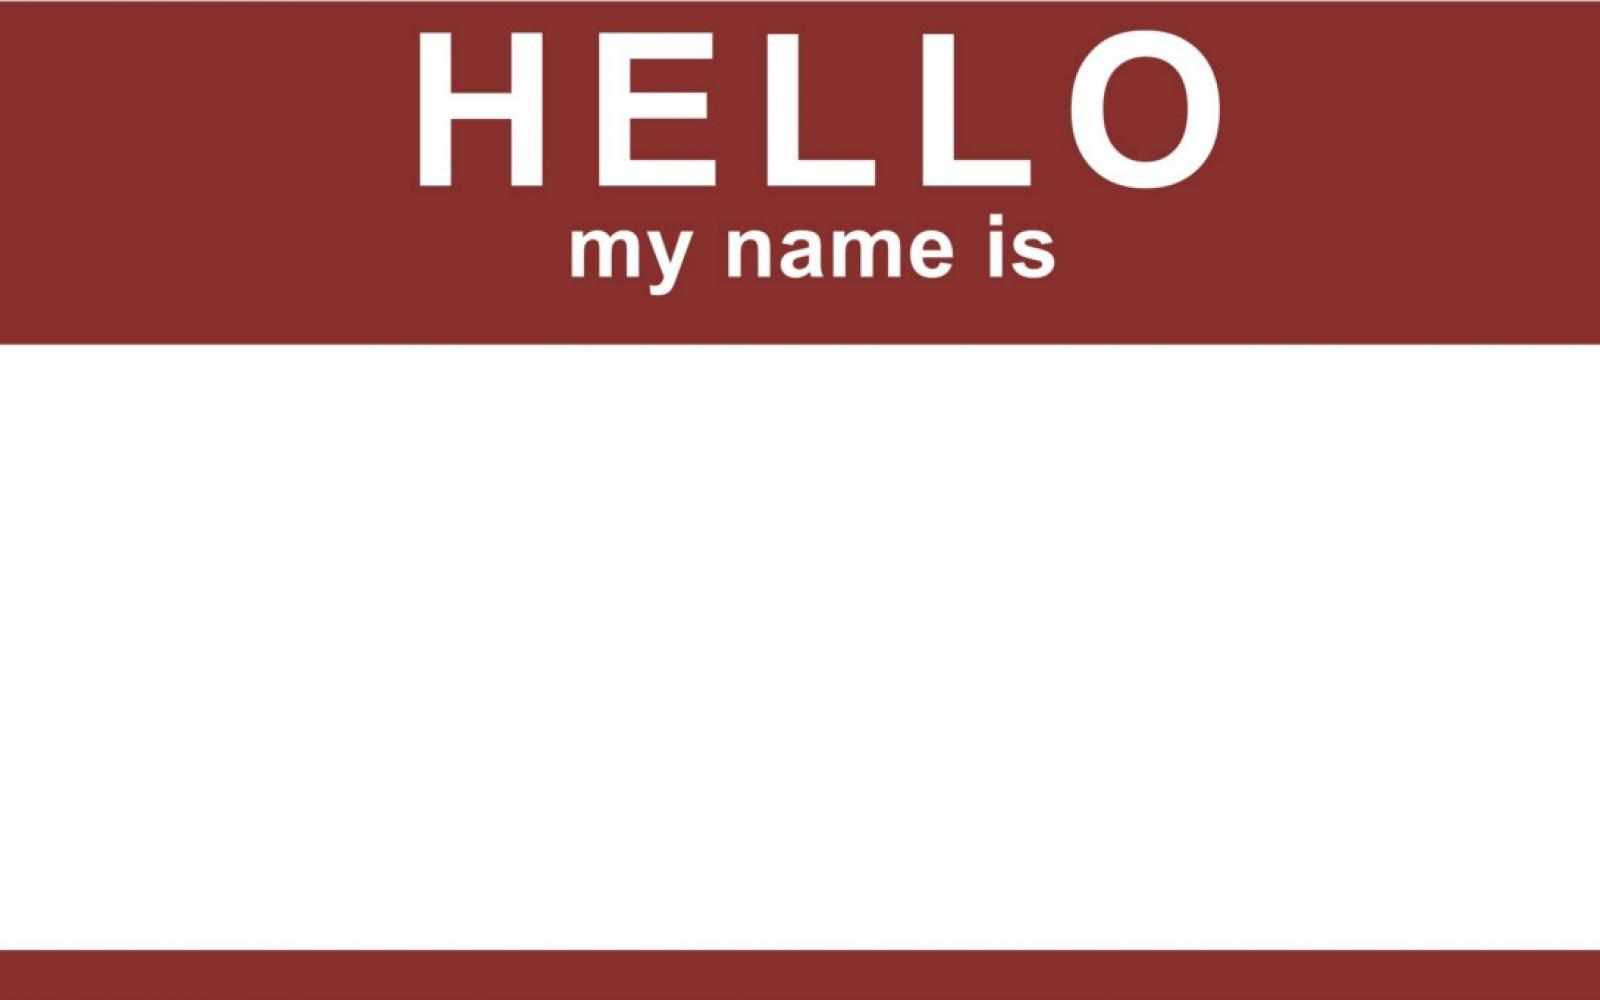 What is the value of saying ‘hello’?